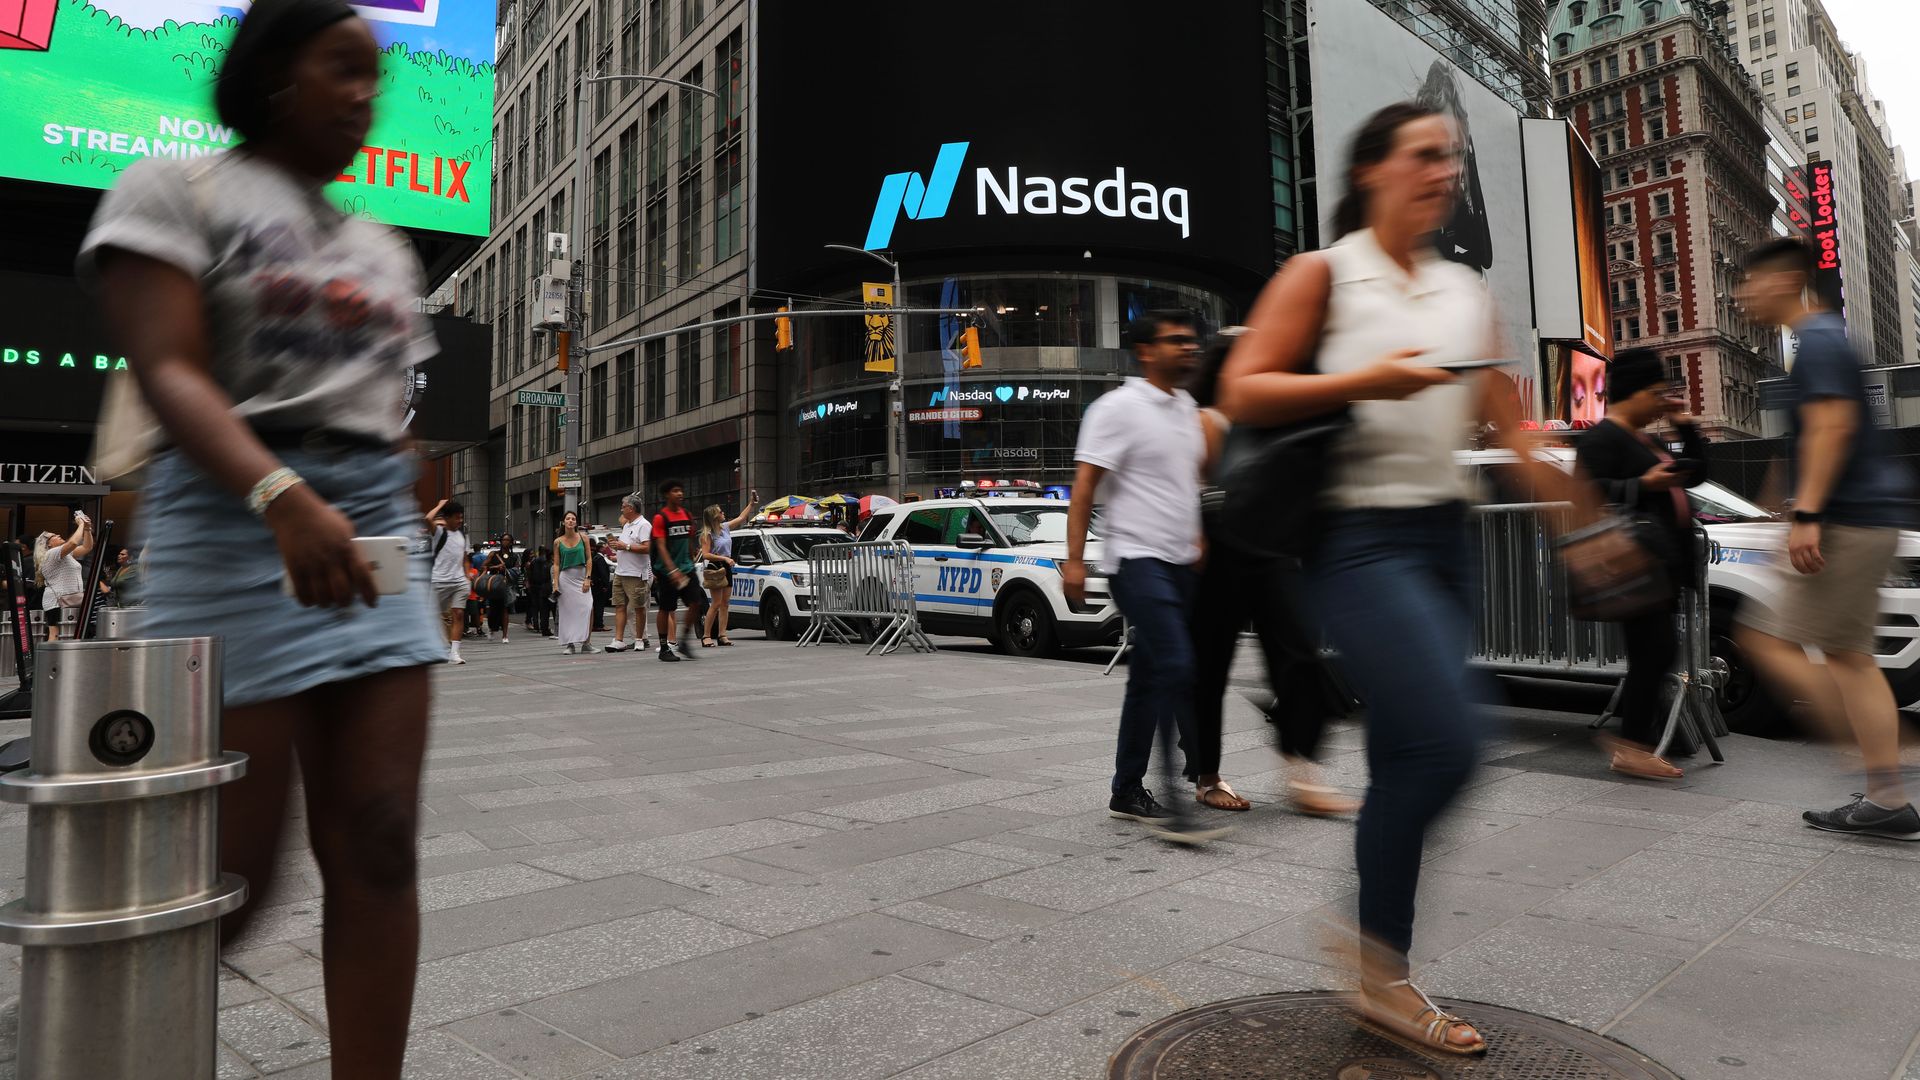 In this image, people rush by a digital NASDAQ sign in New York City.